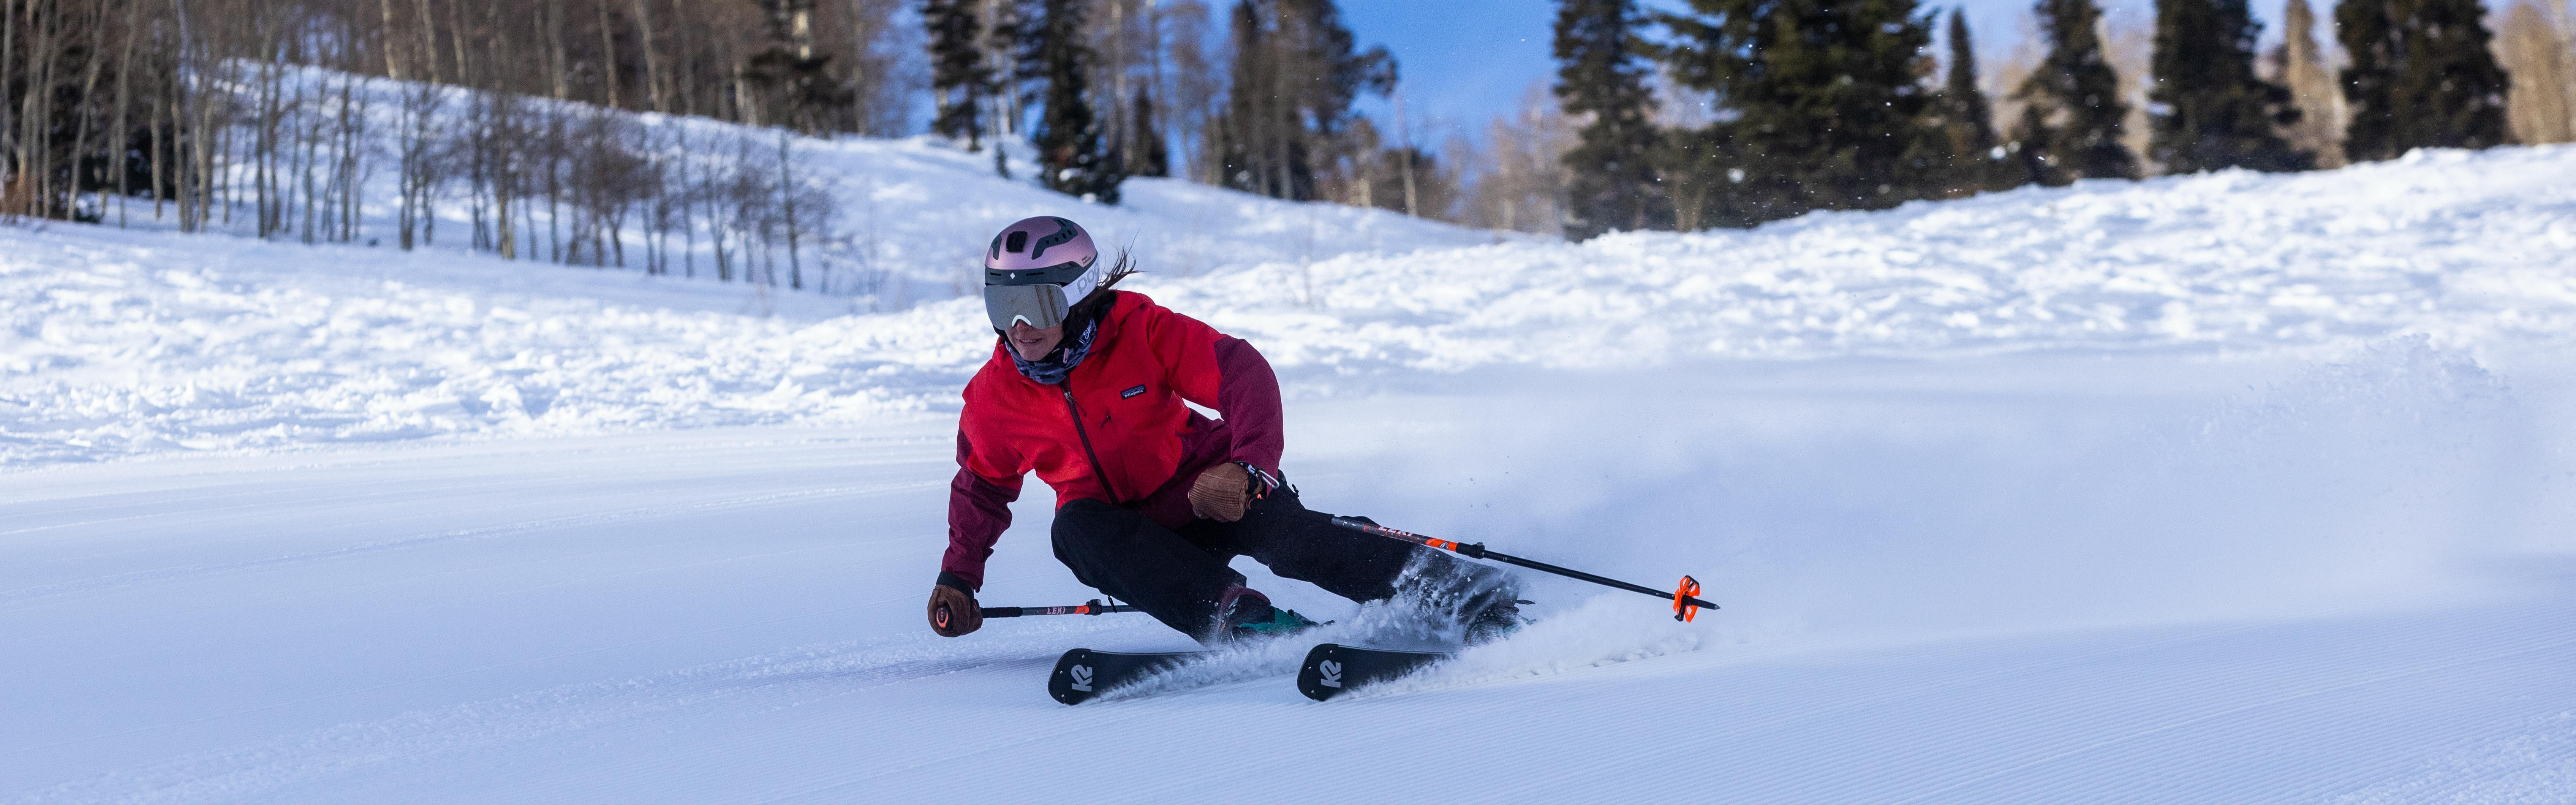 A woman skis downhill on K2 skis.